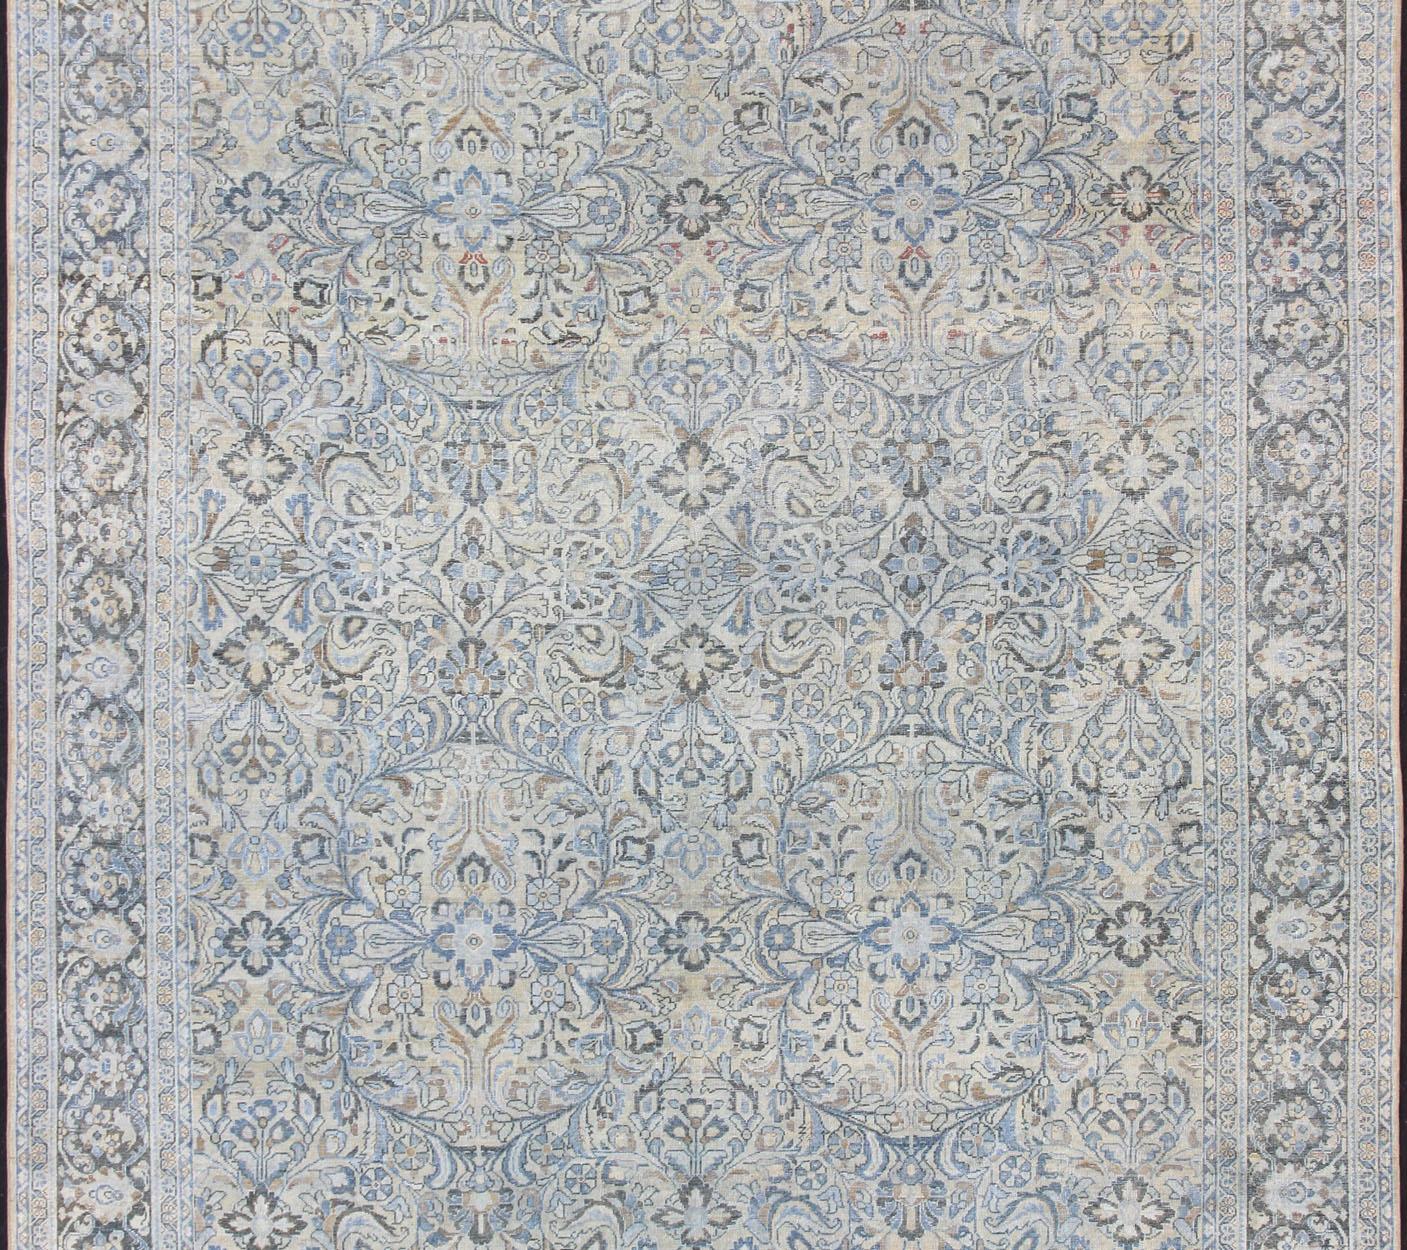 Sultanabad Antique Persian Mahal Rug with Sub Floral Design in Blue, Charcoal & Cream